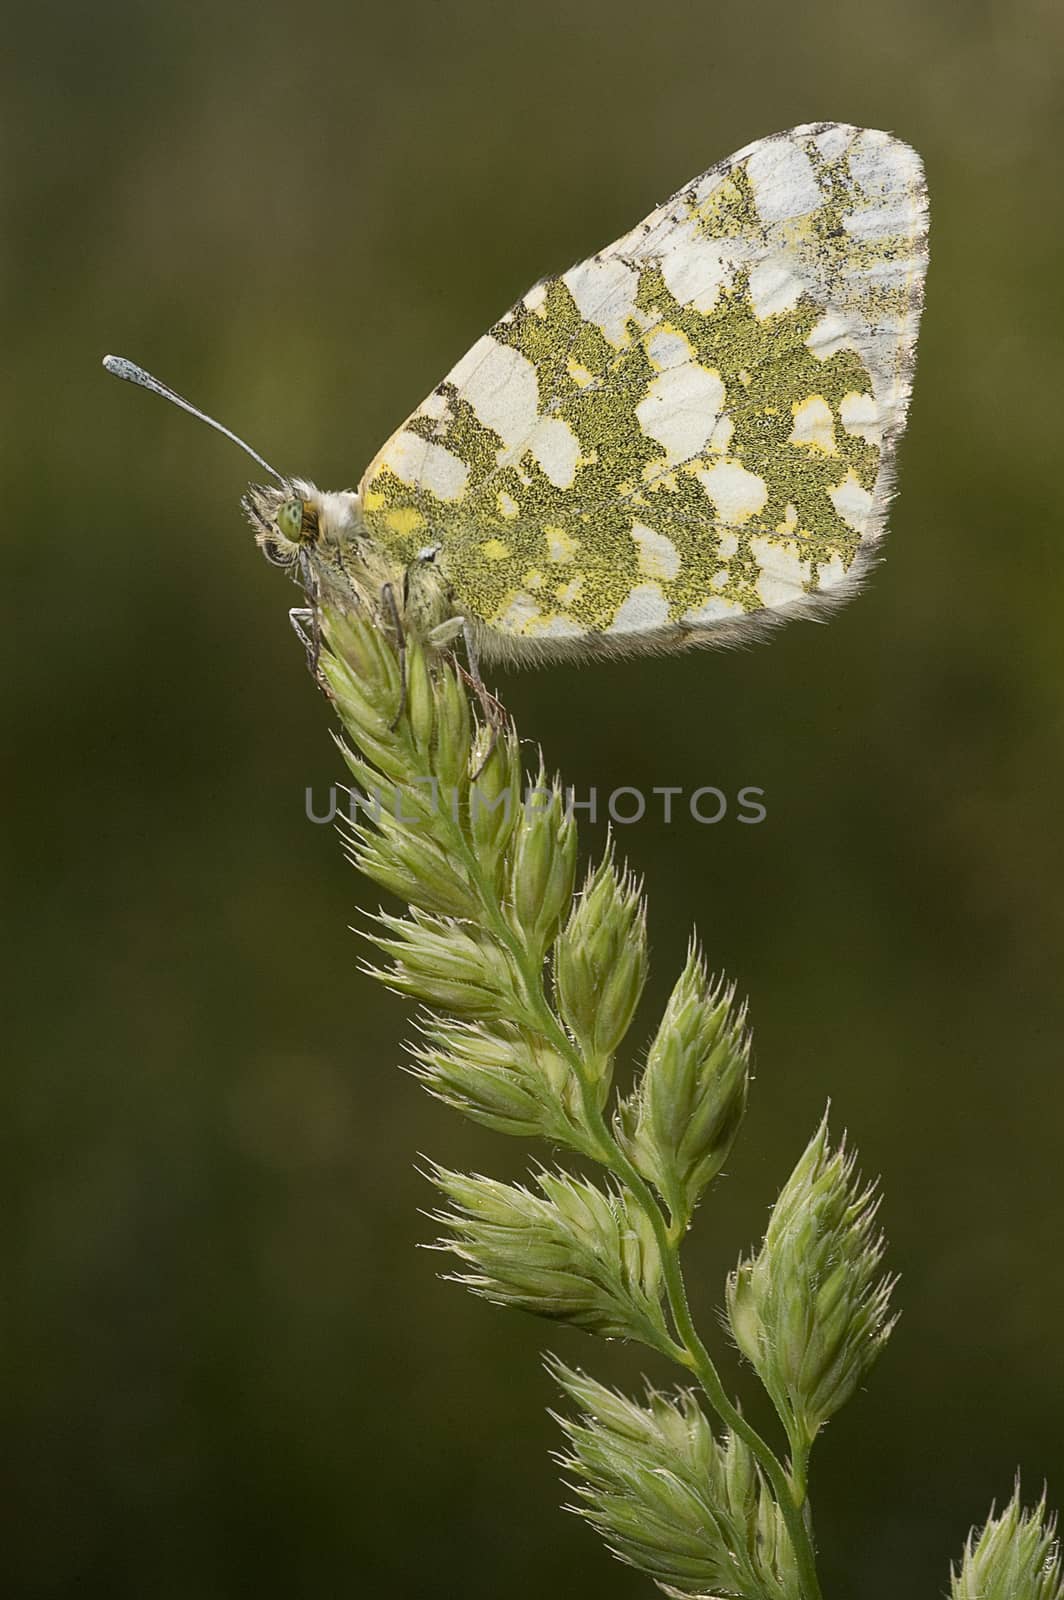 The orange tip butterfly (Anthocharis cardamines) by jalonsohu@gmail.com